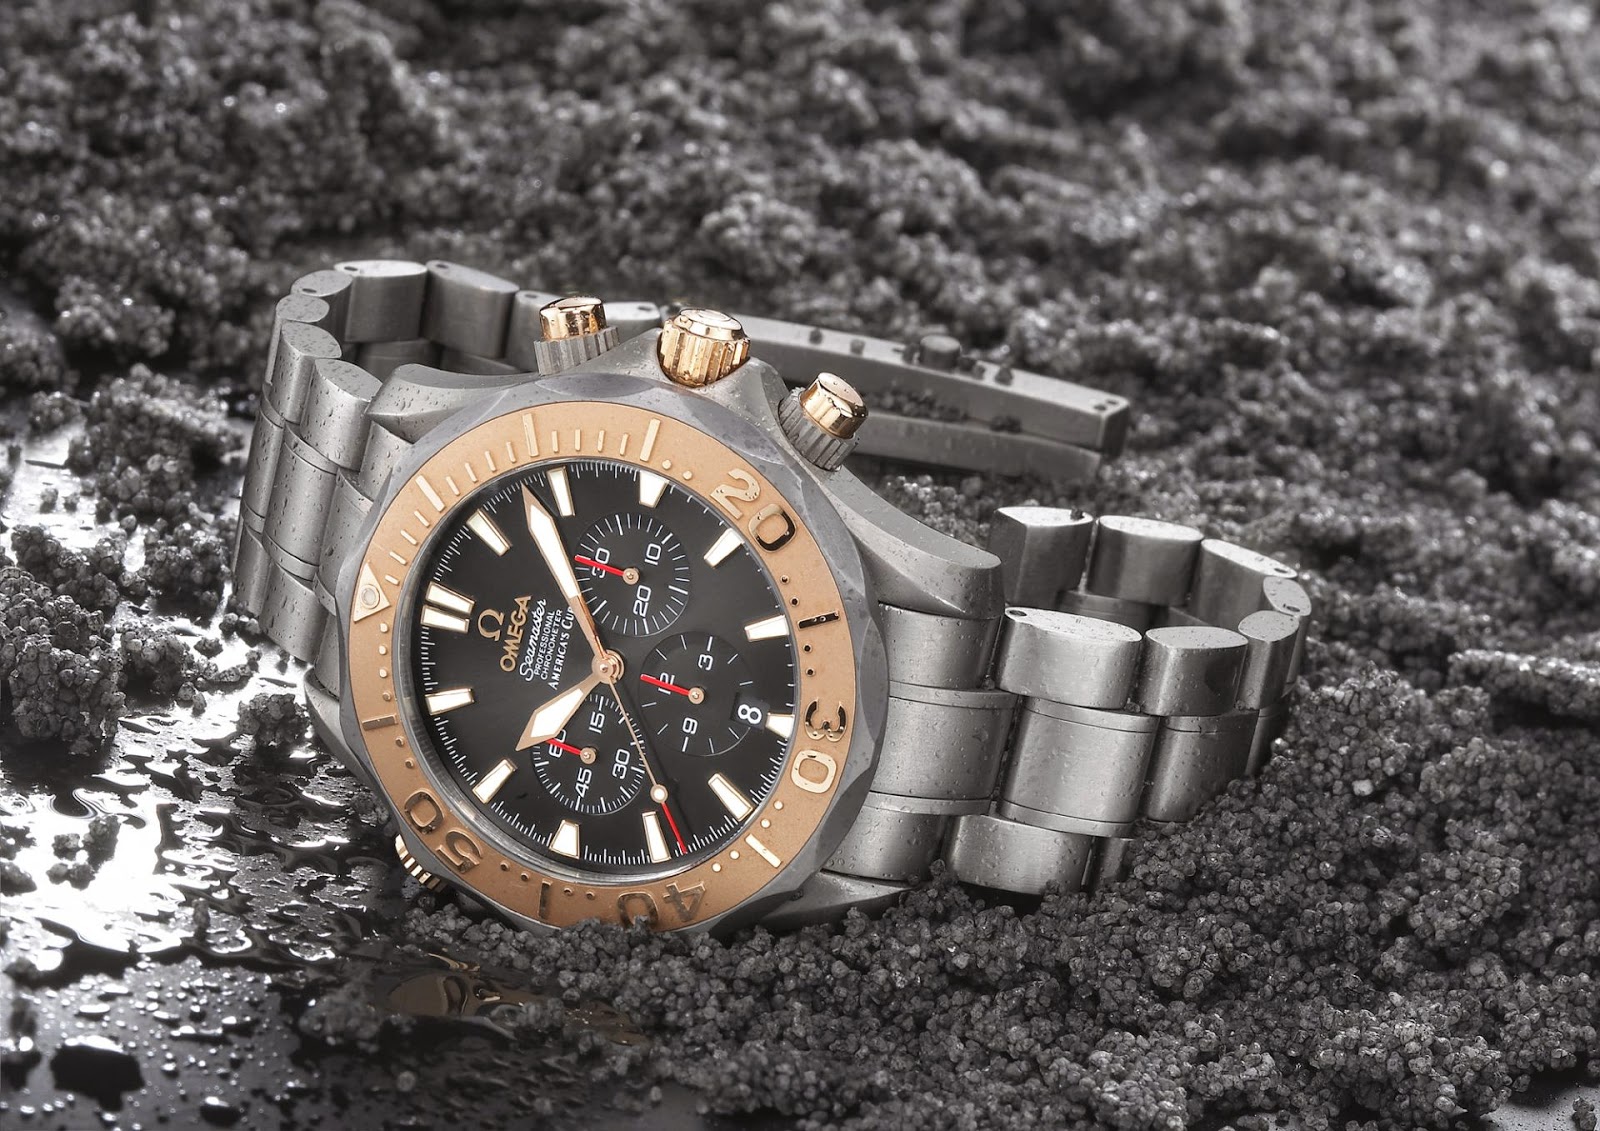 OMEGA America's Cup Collection 2002 - The OMEGA America's Cup Chronograph and the America's Cup Racing Chronograph